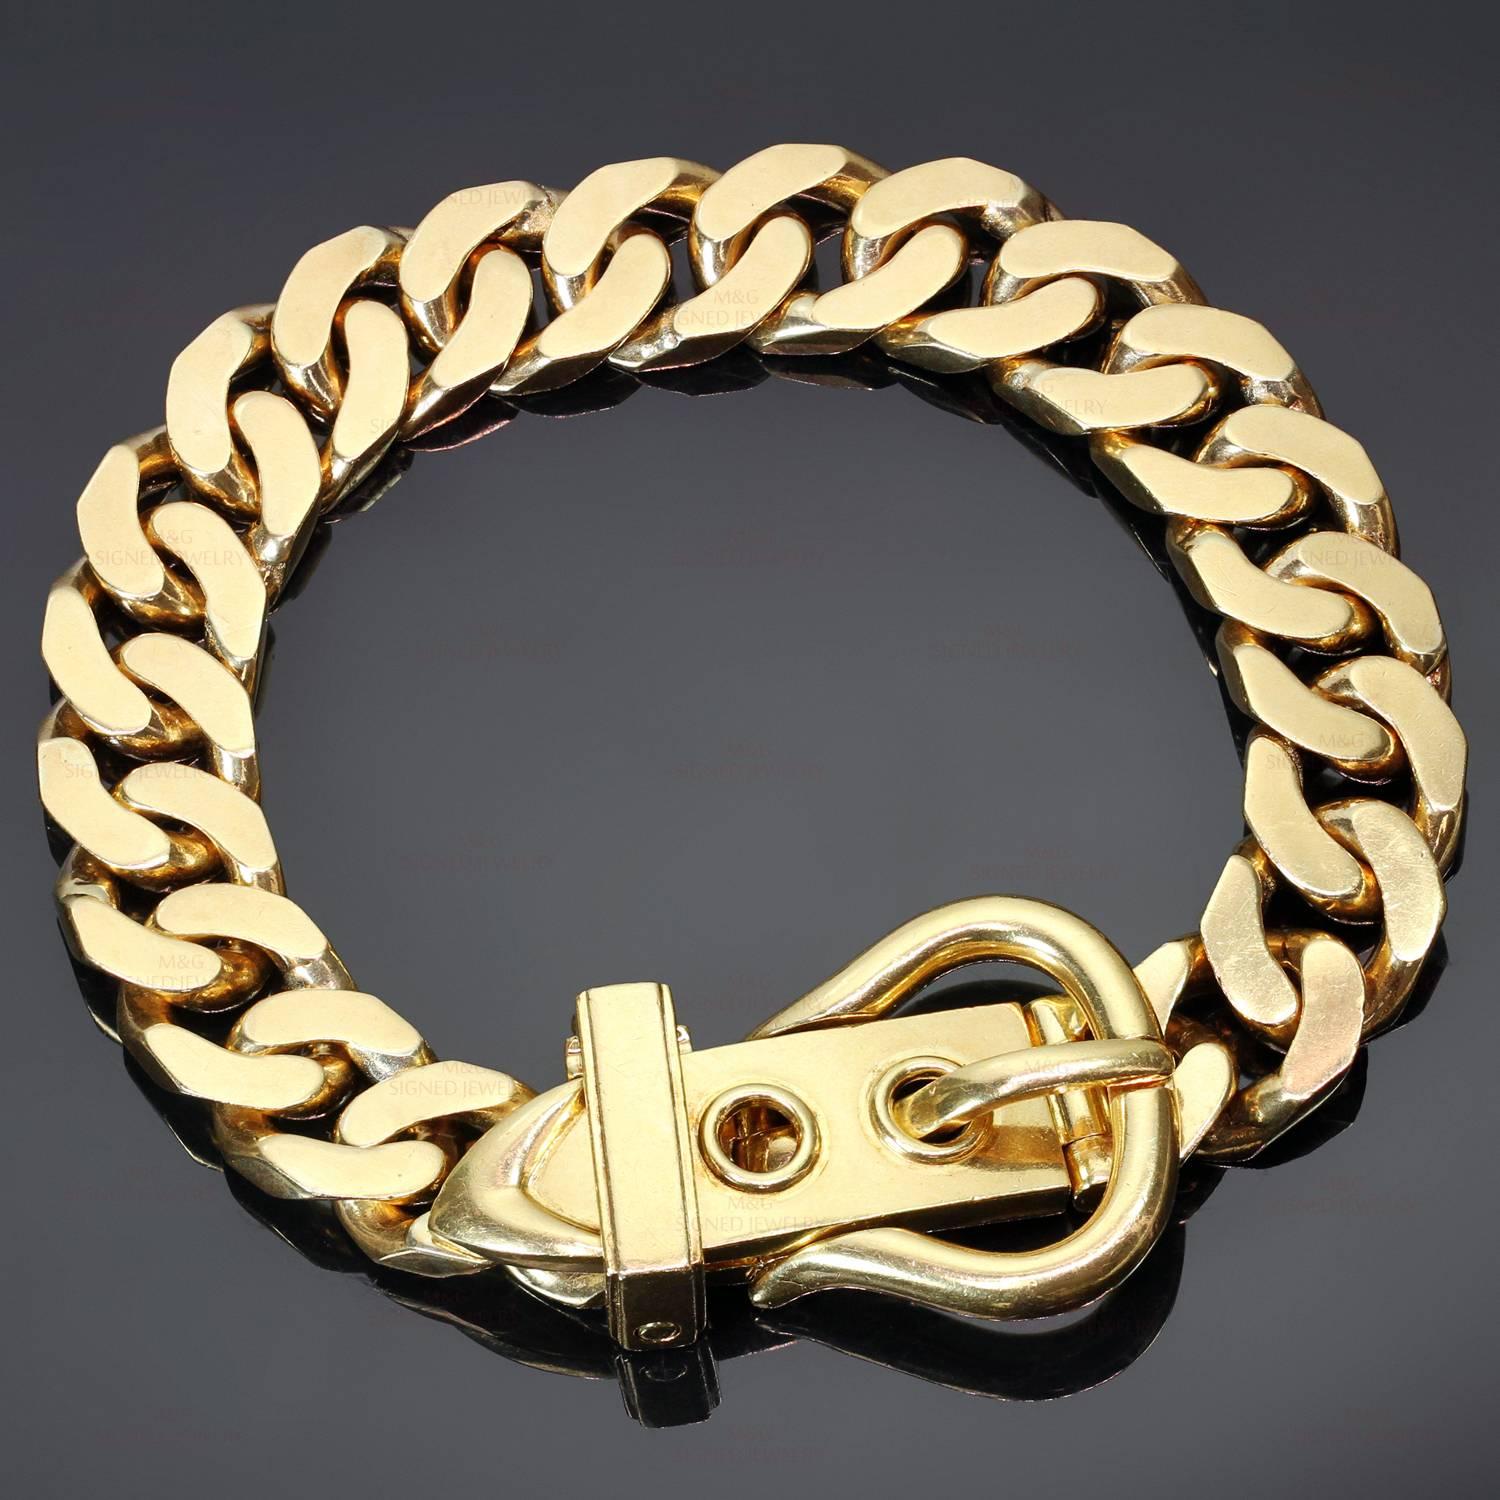 This chic and rare Boucle Sellier bracelet created by Hermes in Paris in 1980s is crafted in 18k yellow gold and features a belt design with a heavy curb link chain which ends with a cute buckle. Adjustable length will fit 8